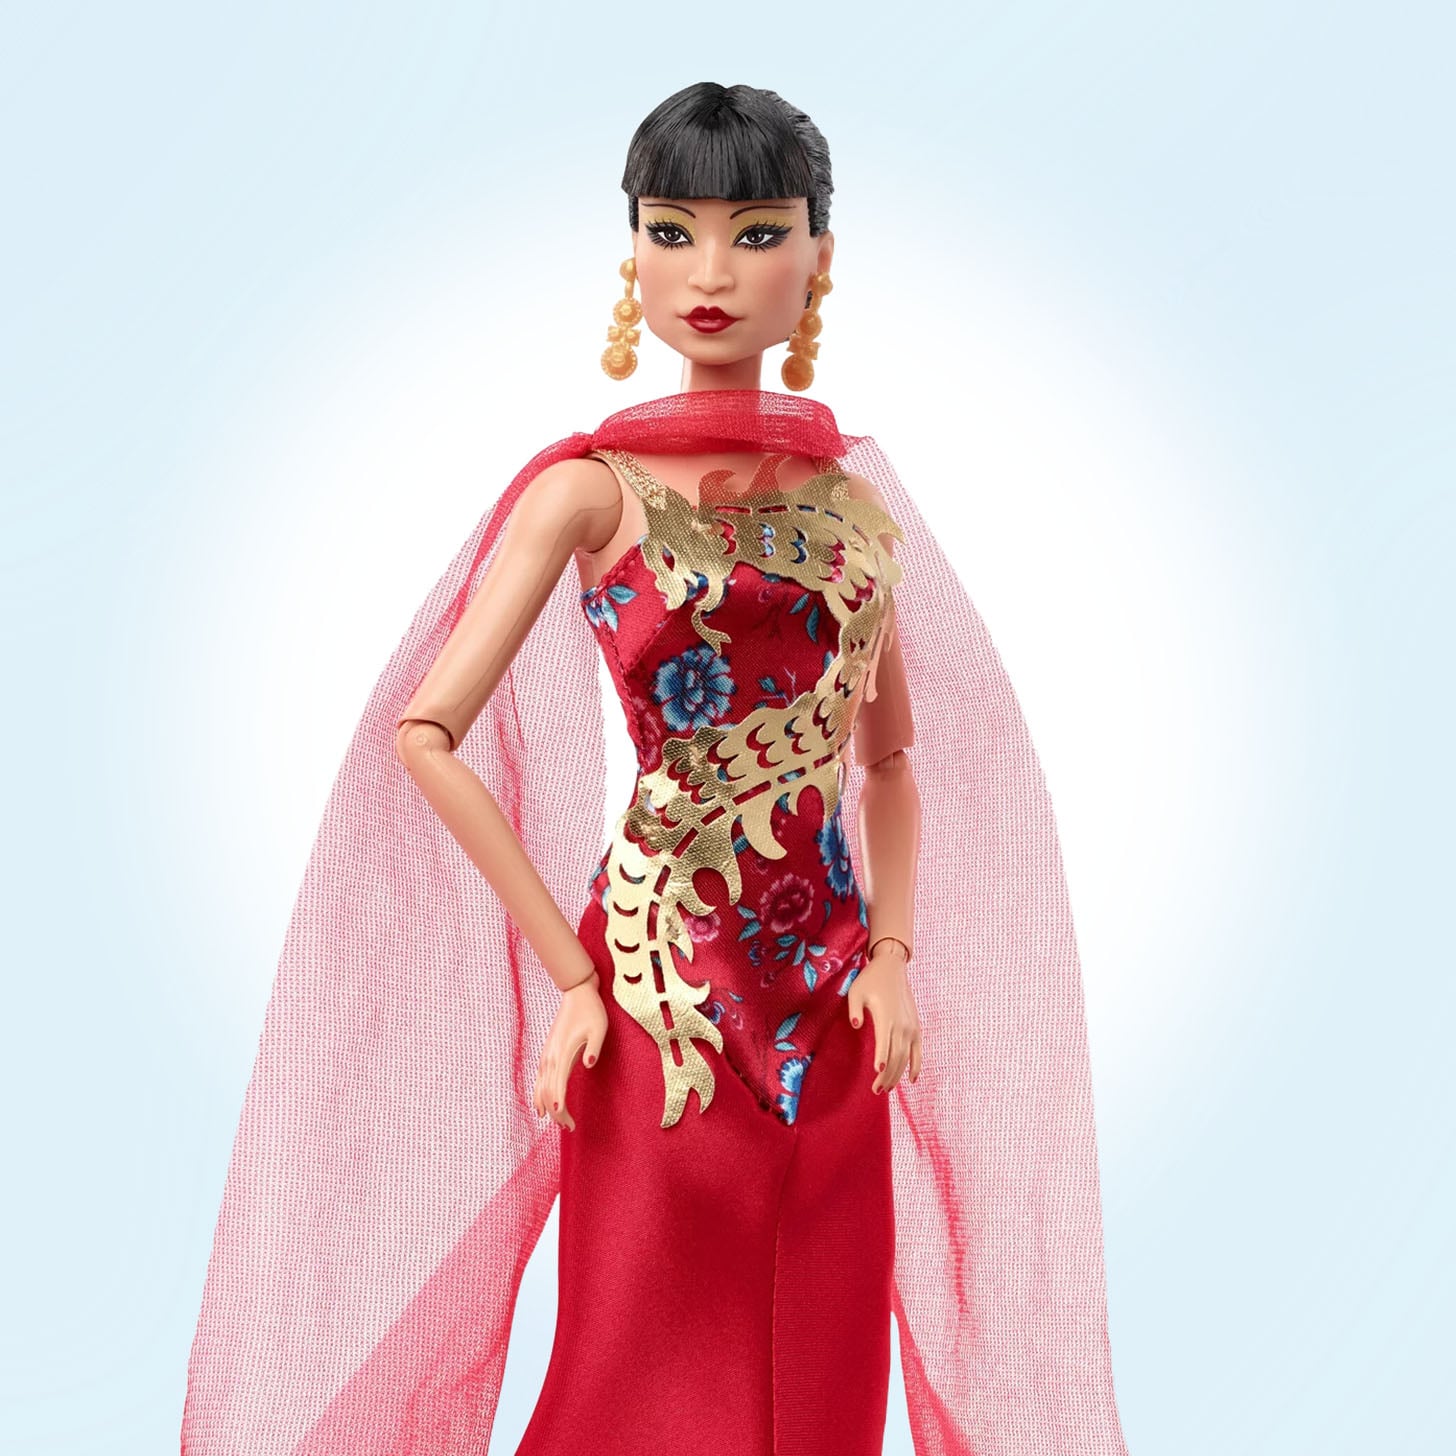 Barbie introduces Anna May Wong doll